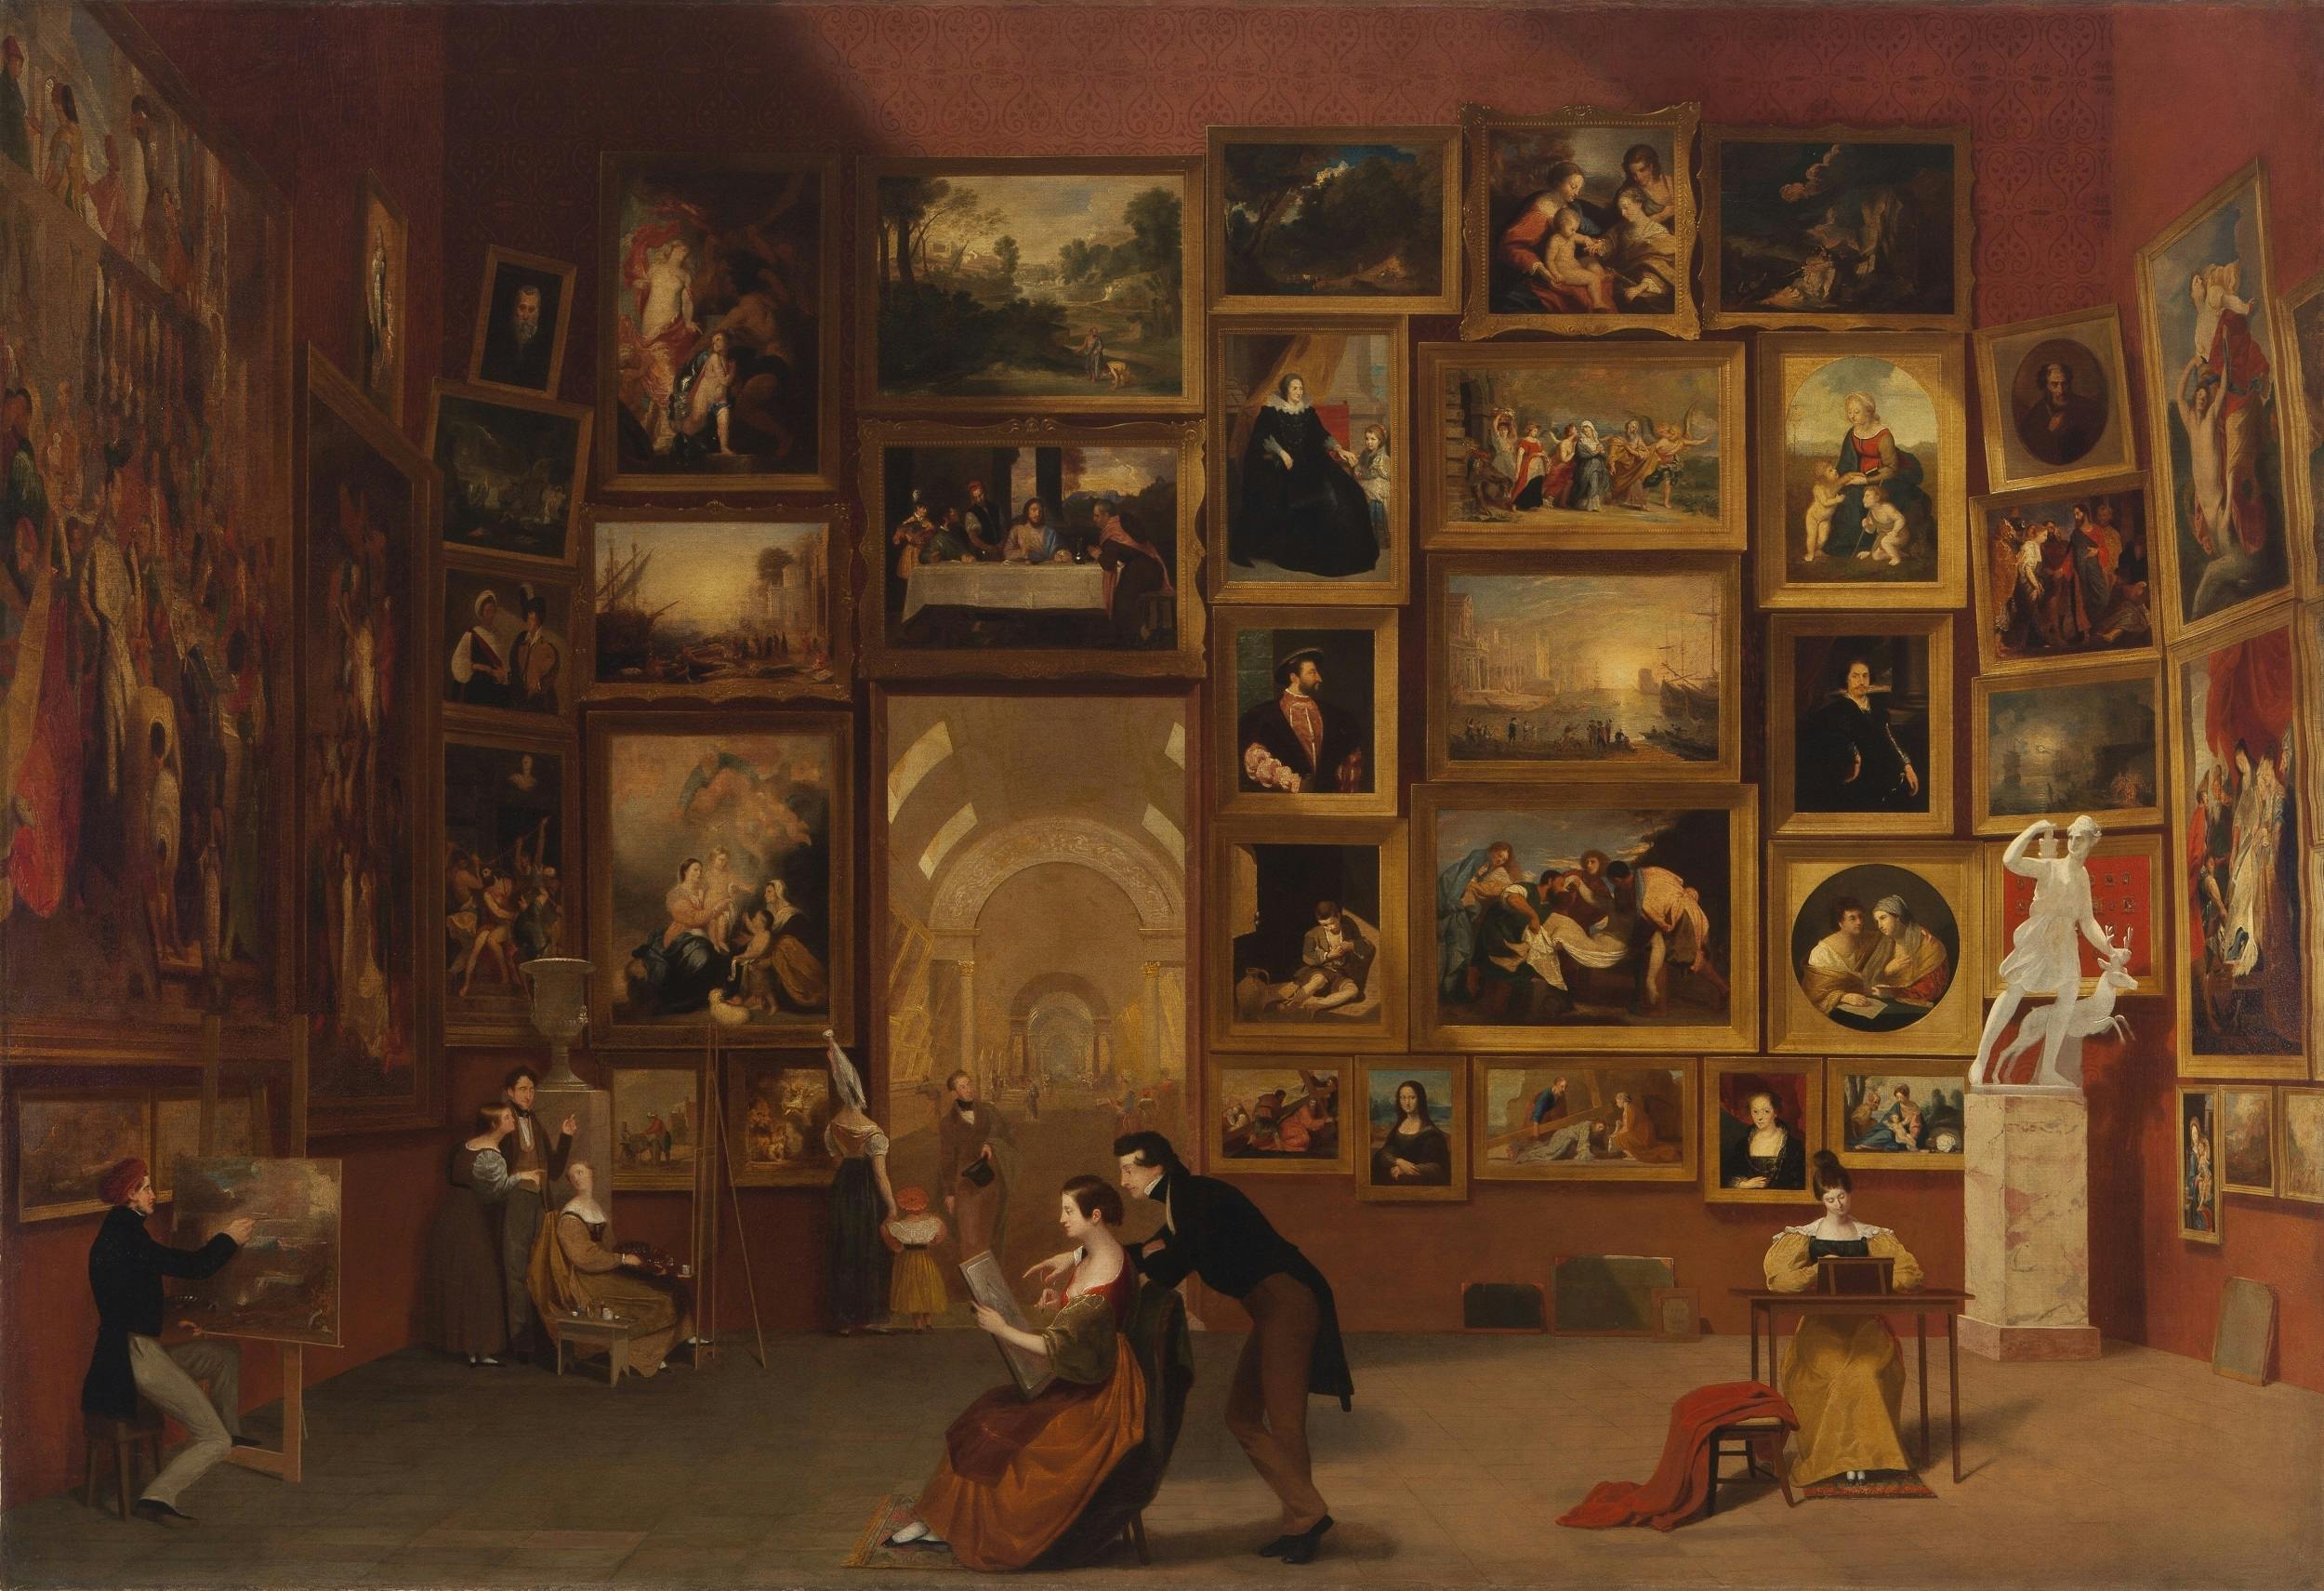 Samuel Morse's "Gallery of the Louvre", 1831-1833